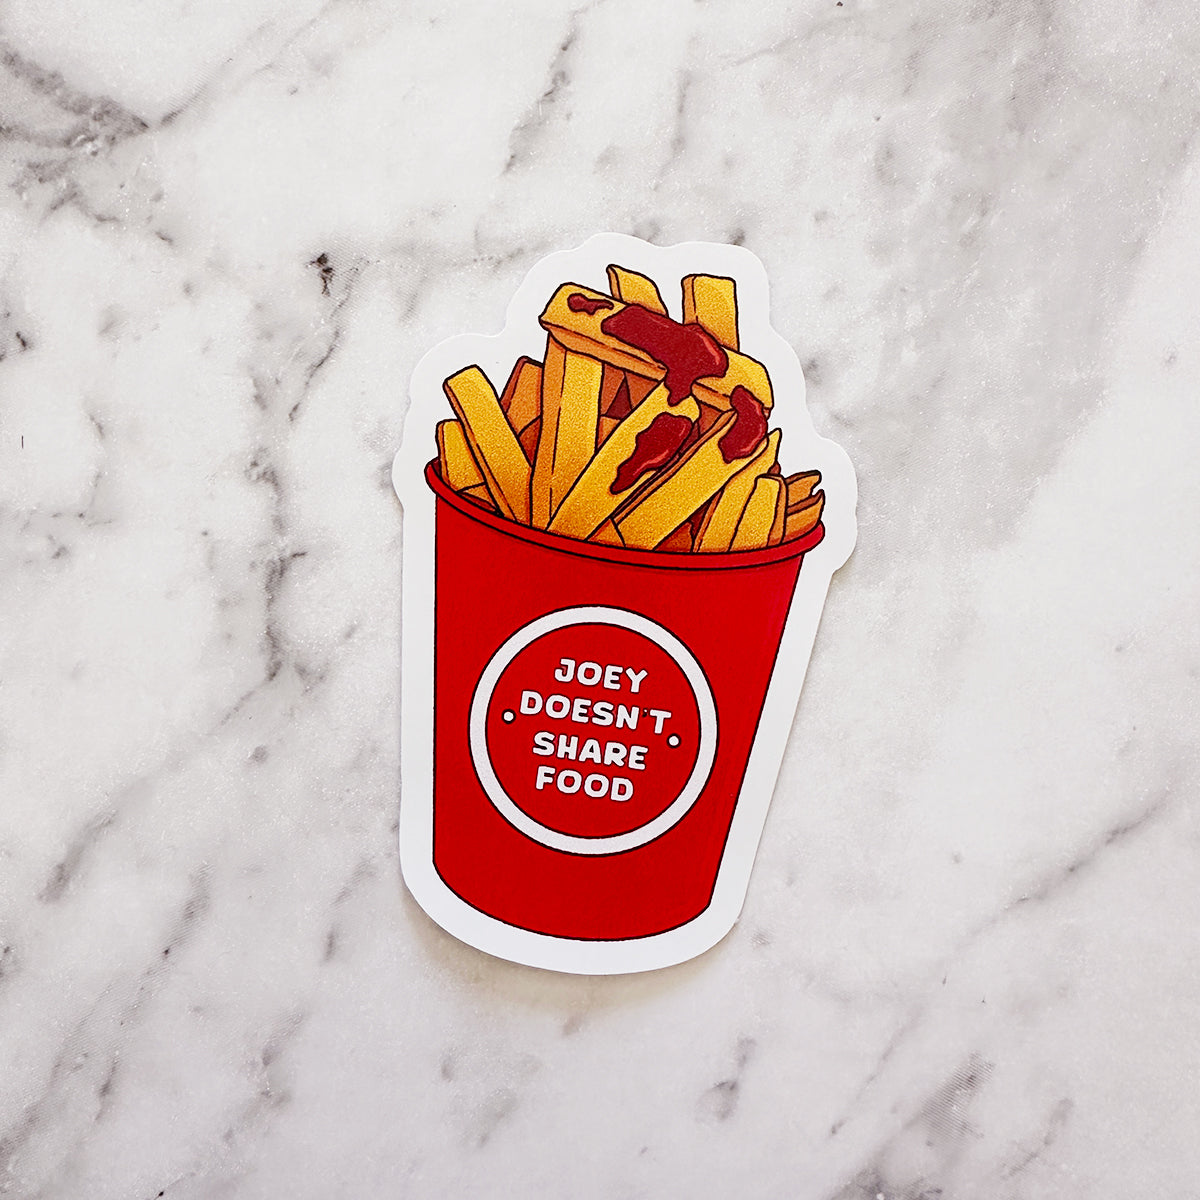 Limited Edition Joey Doesn't Share Food FRIENDS Hot Chips Die Cut Sticker by Closet Planner Addict (DC-037)